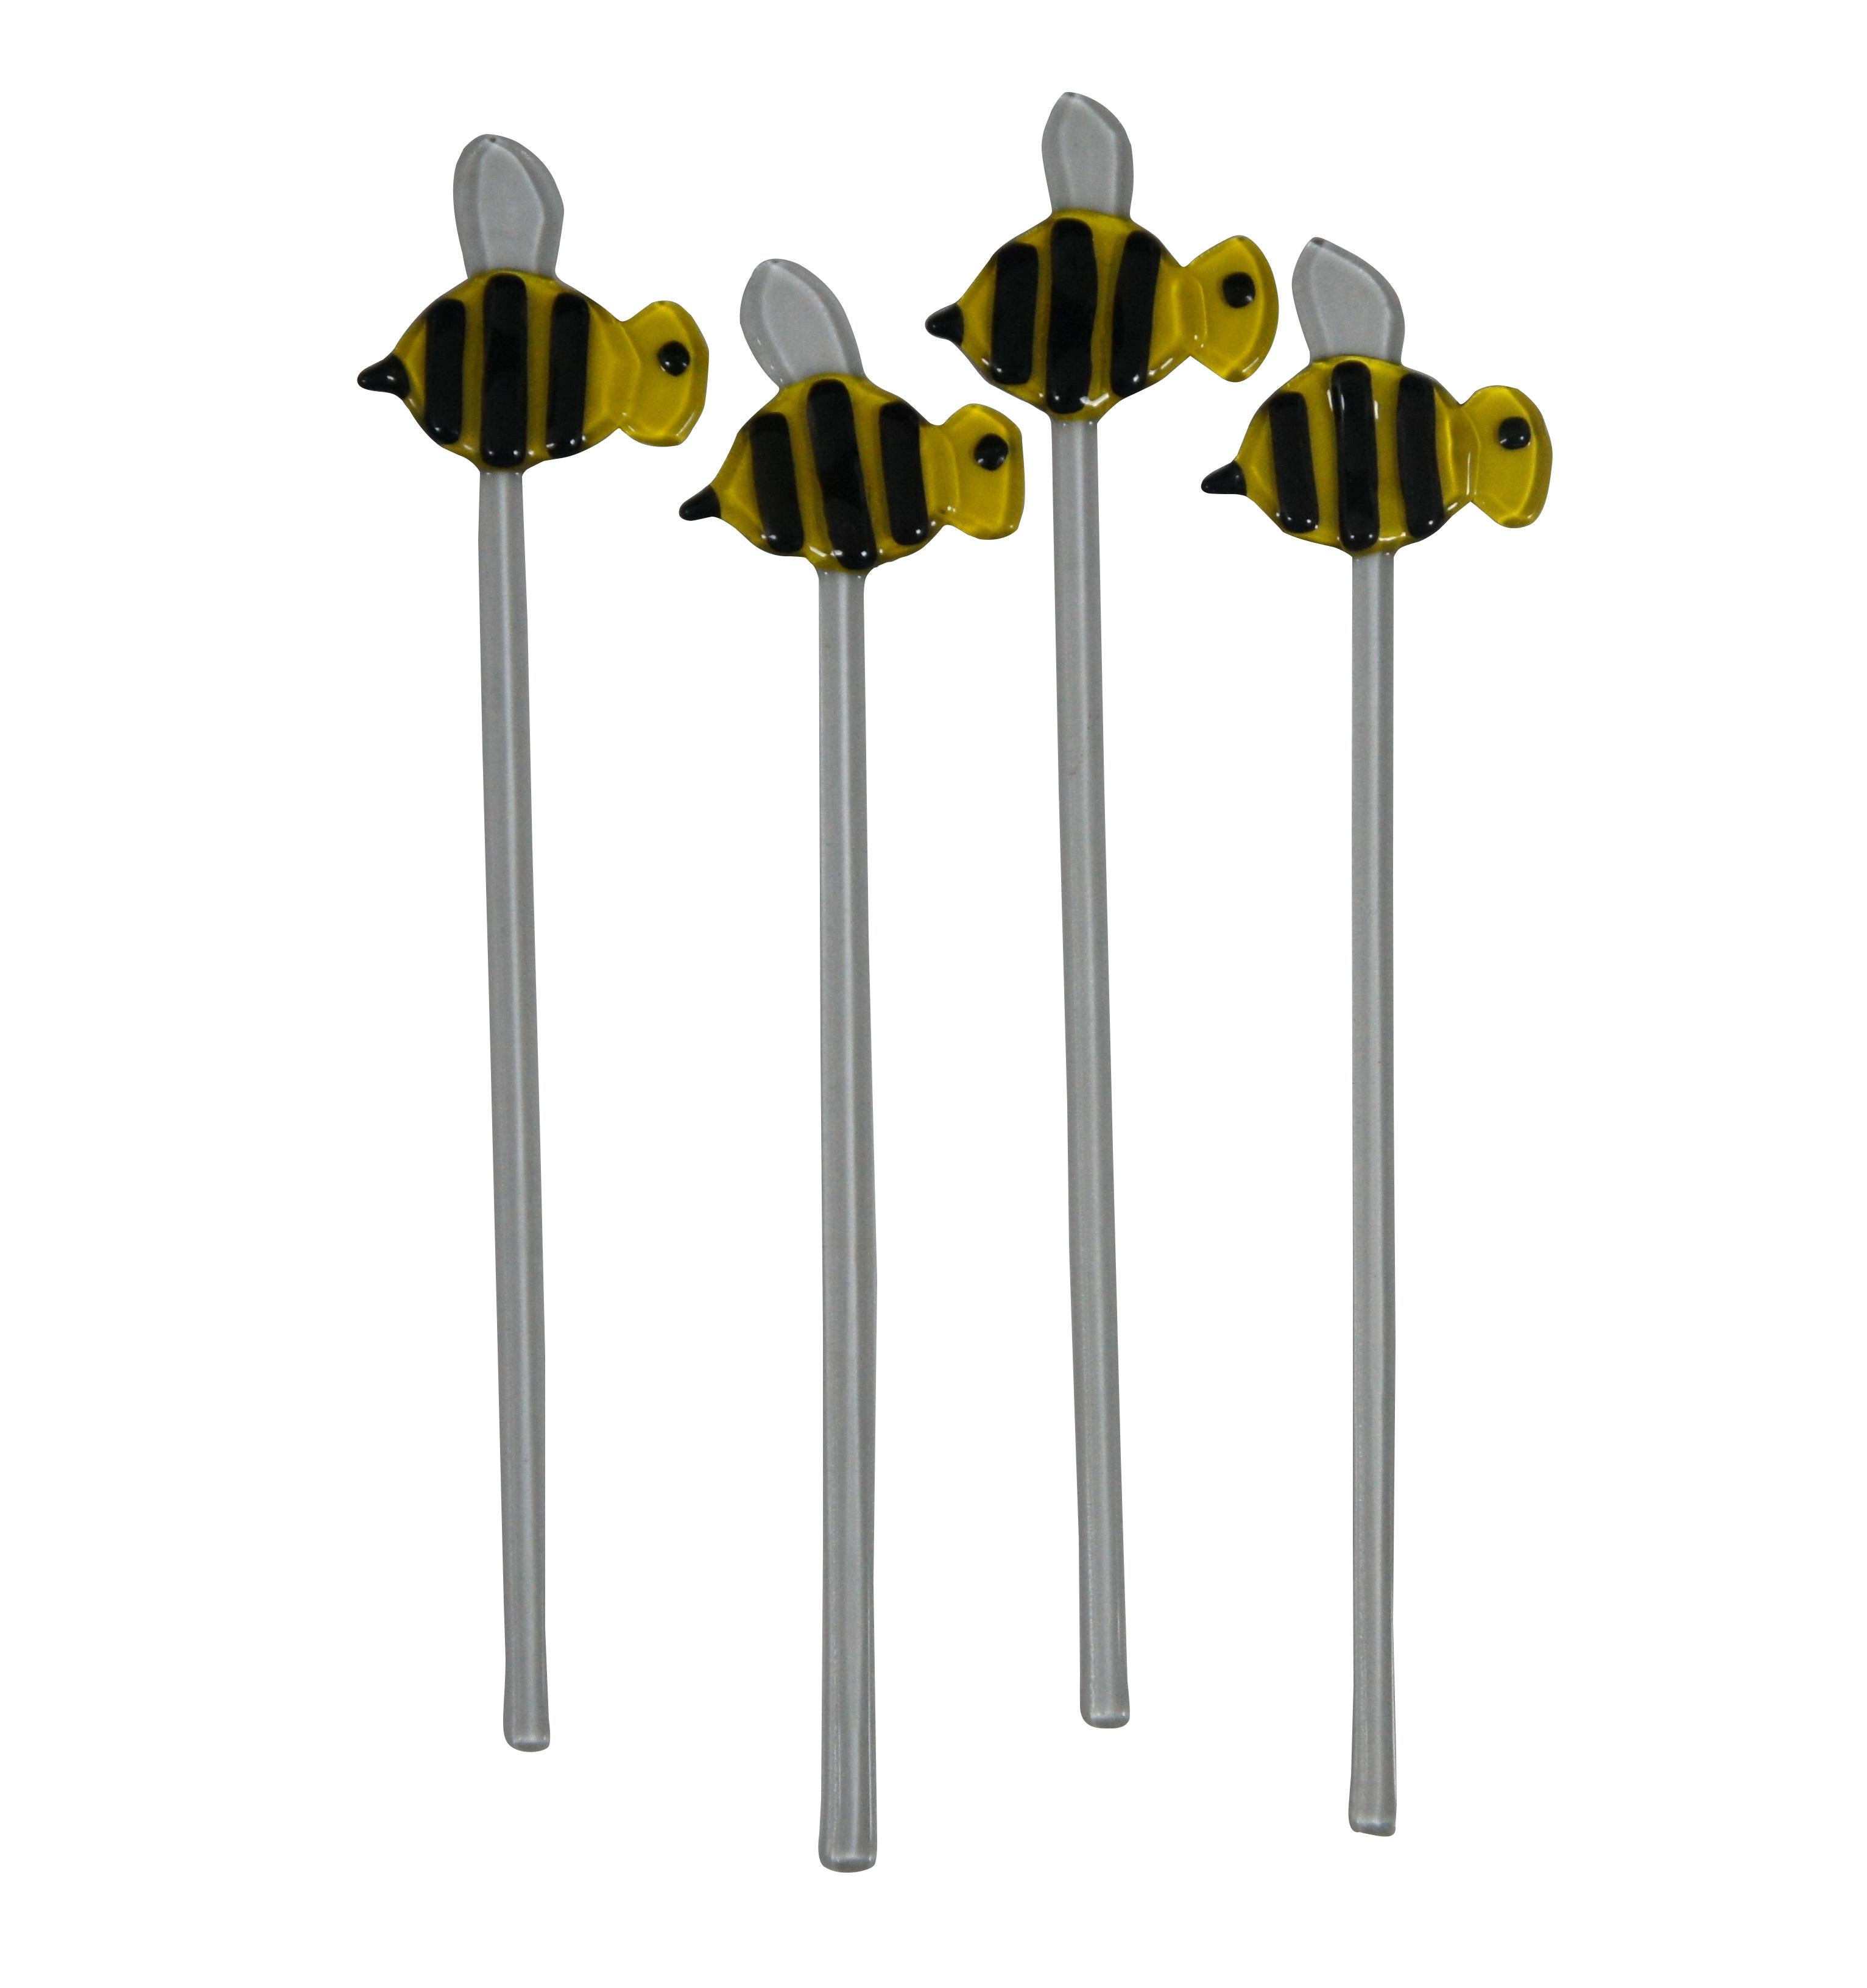 Six vintage fused glass decorative plant stakes / sticks. Four in the shape of yellow and black bumble bees and two yellow birds.

Dimensions:
3